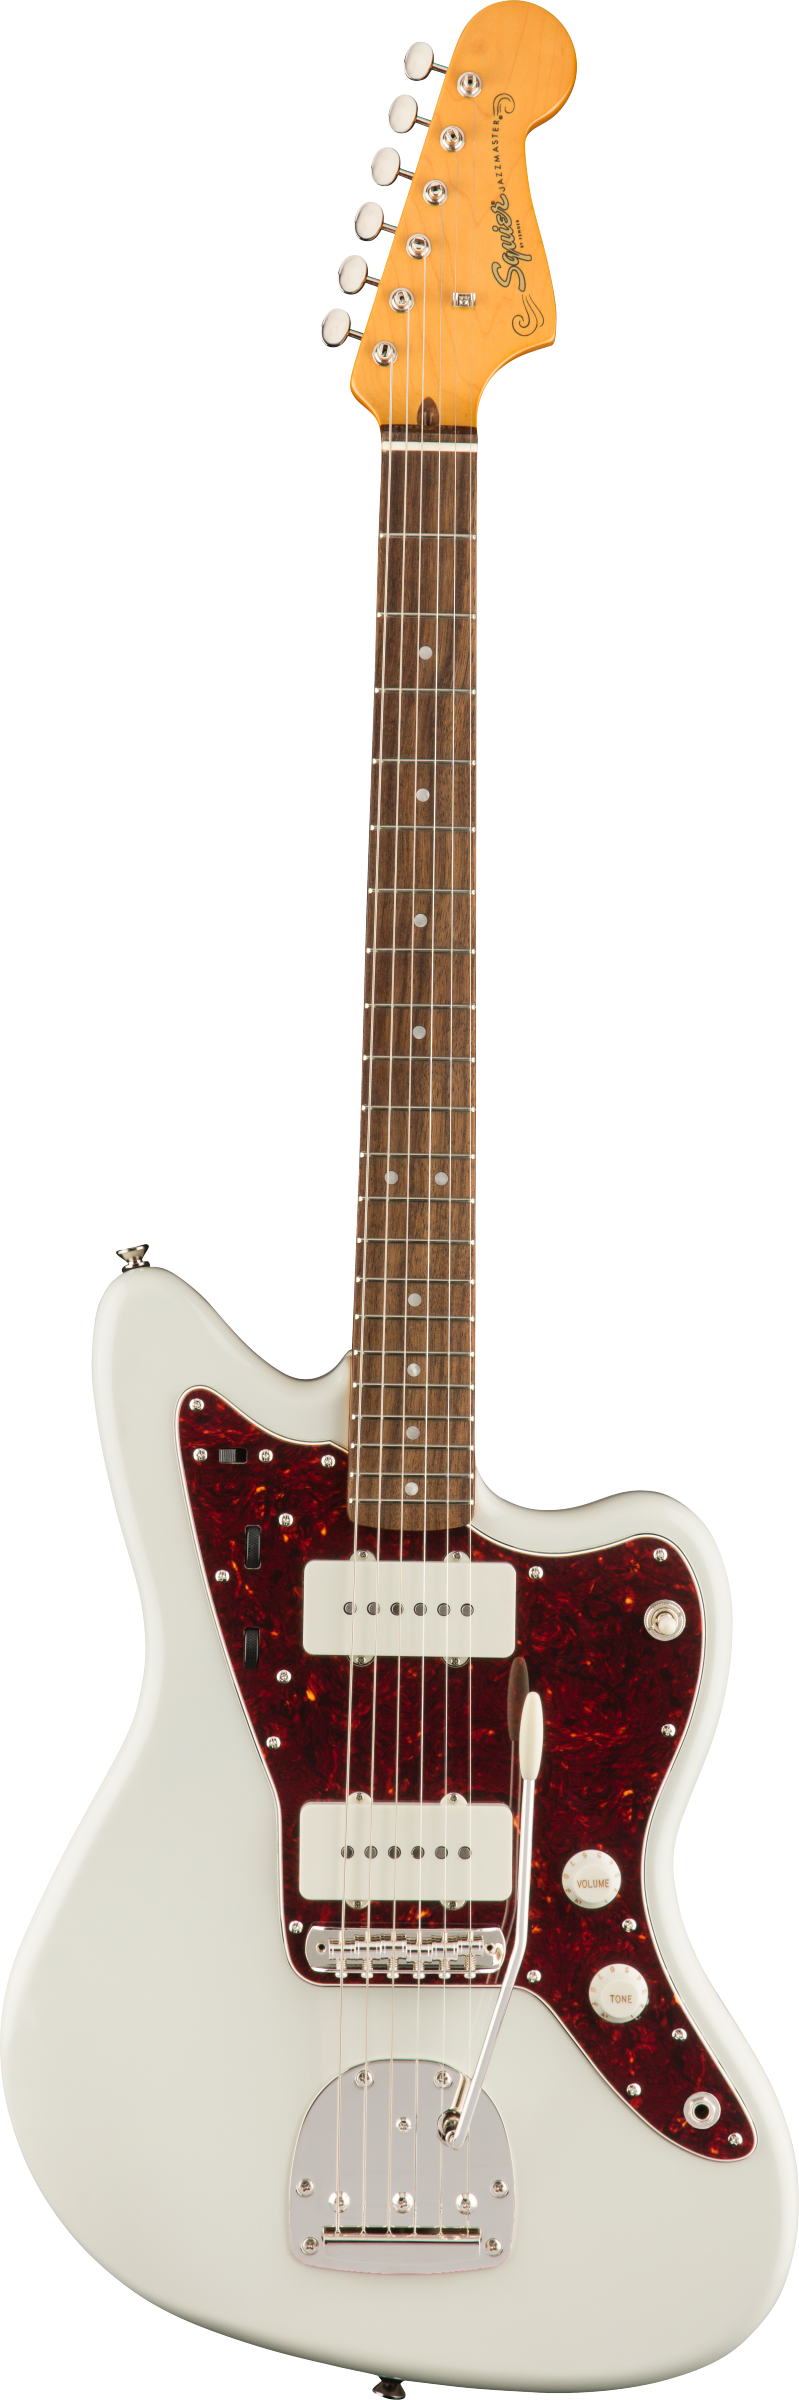 Squier Classic Vibe 60's Jazzmaster Electric Guitar in Olympic White